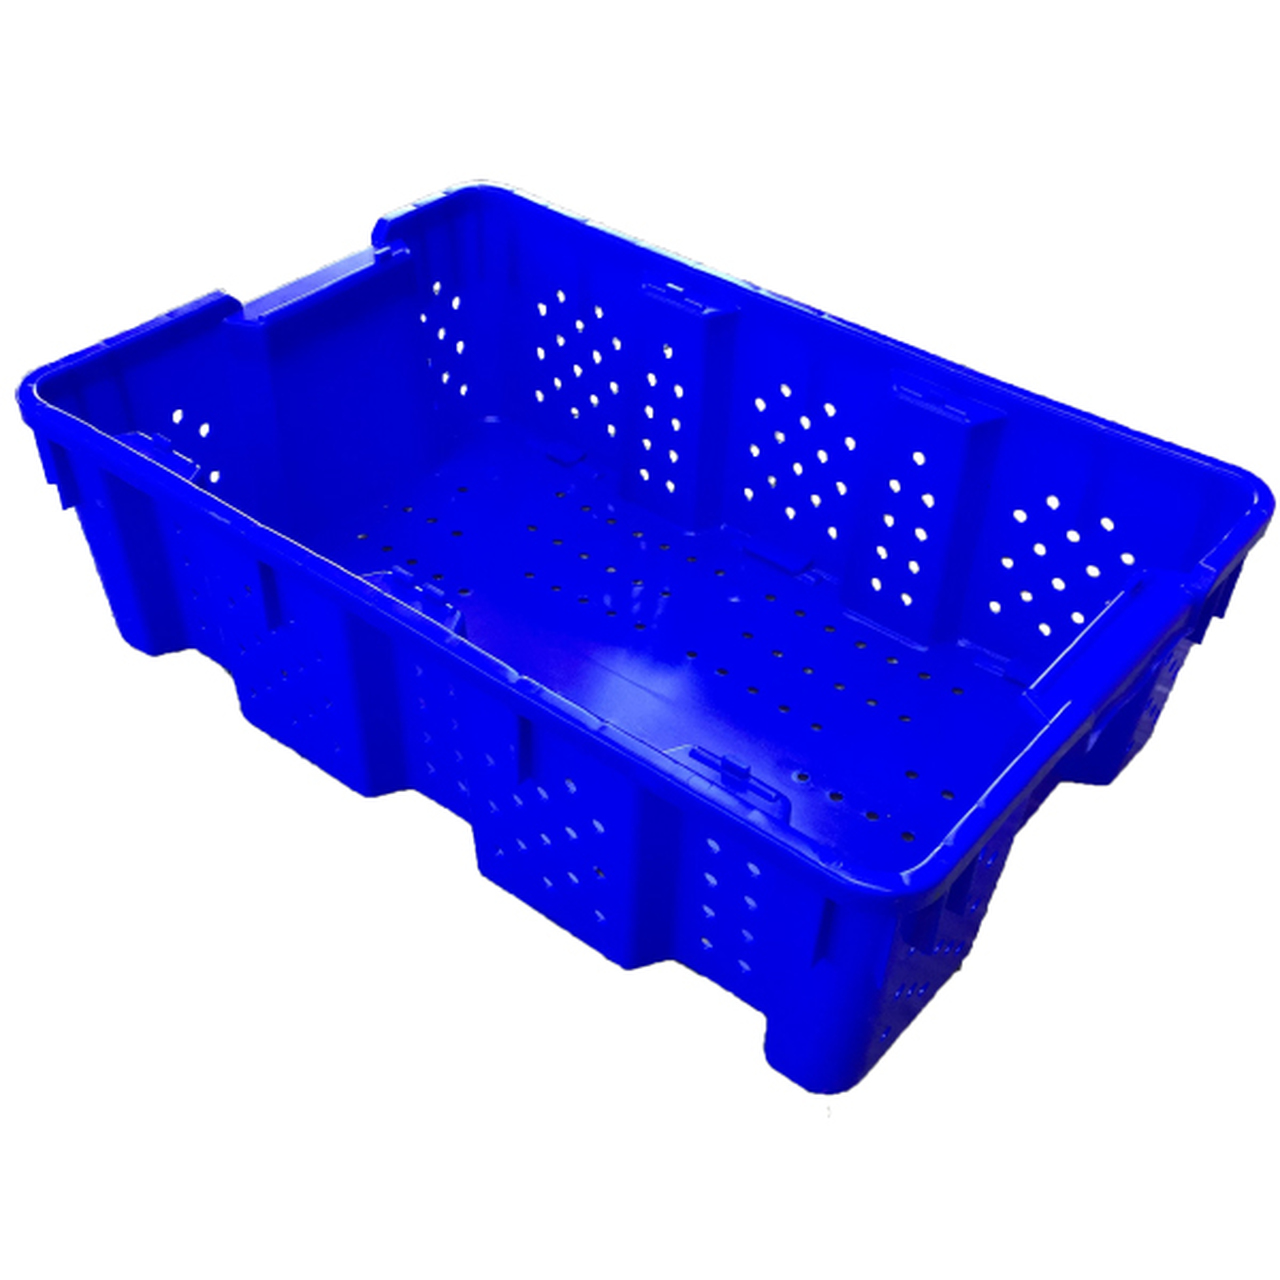 24 x 16 x 07 – Agricultural Handheld Container